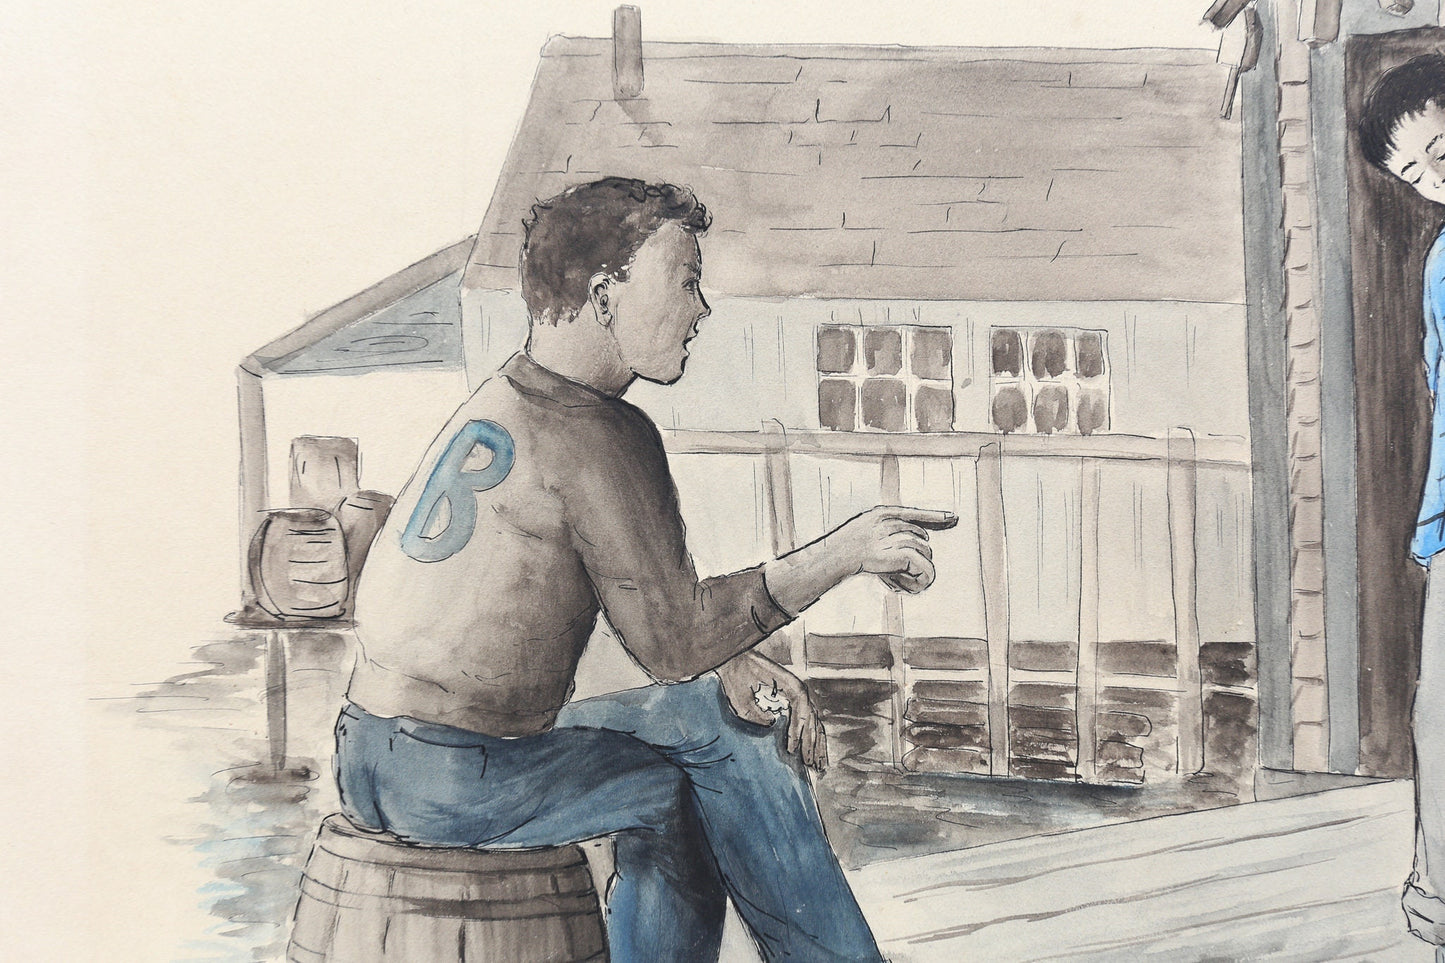 Painting Watercolor Gouache Teenage Boys on pier On the Waterfront Louise Rosen II Illustration Art Black and White